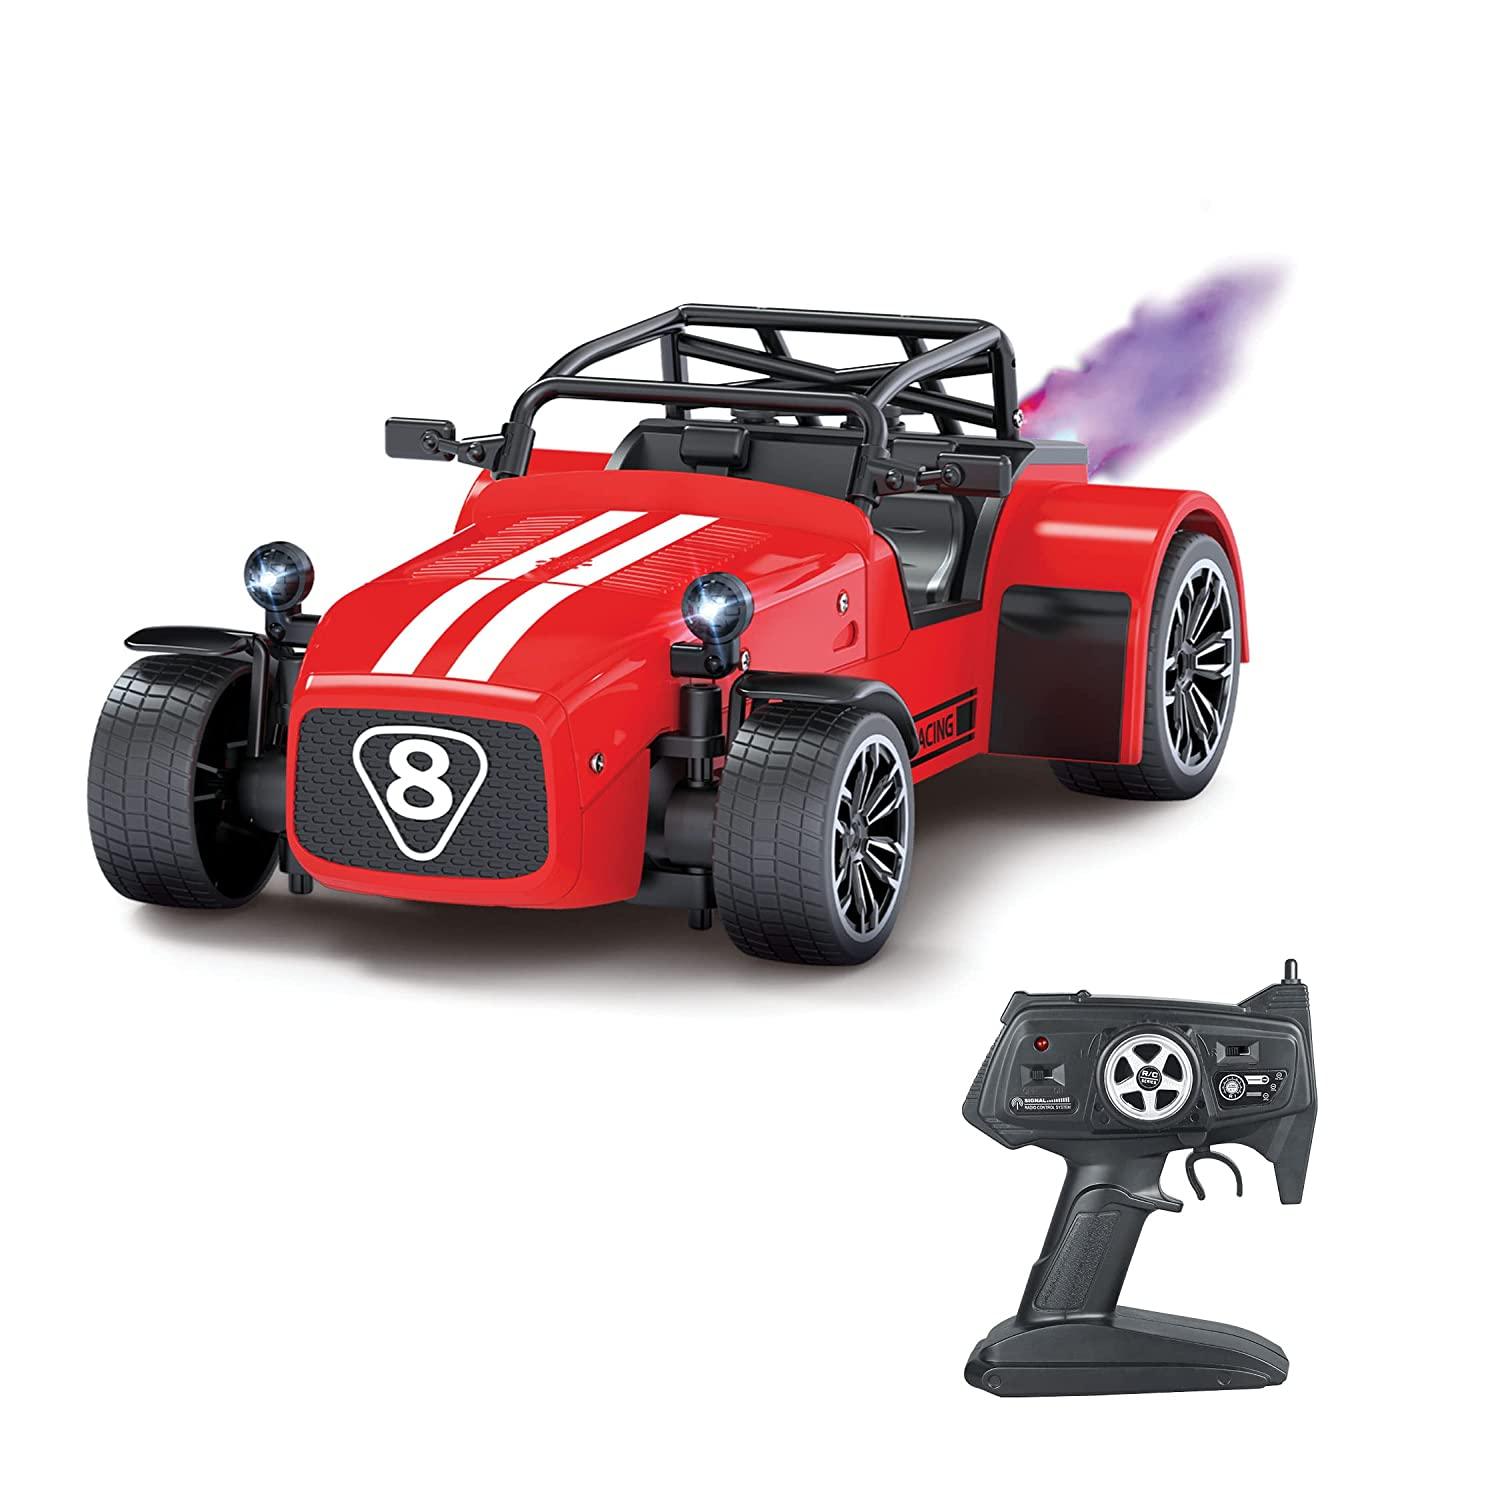 Playzu Classic Remote Control Die Cast With Mist Spray Racing Car – Red - FunCorp India